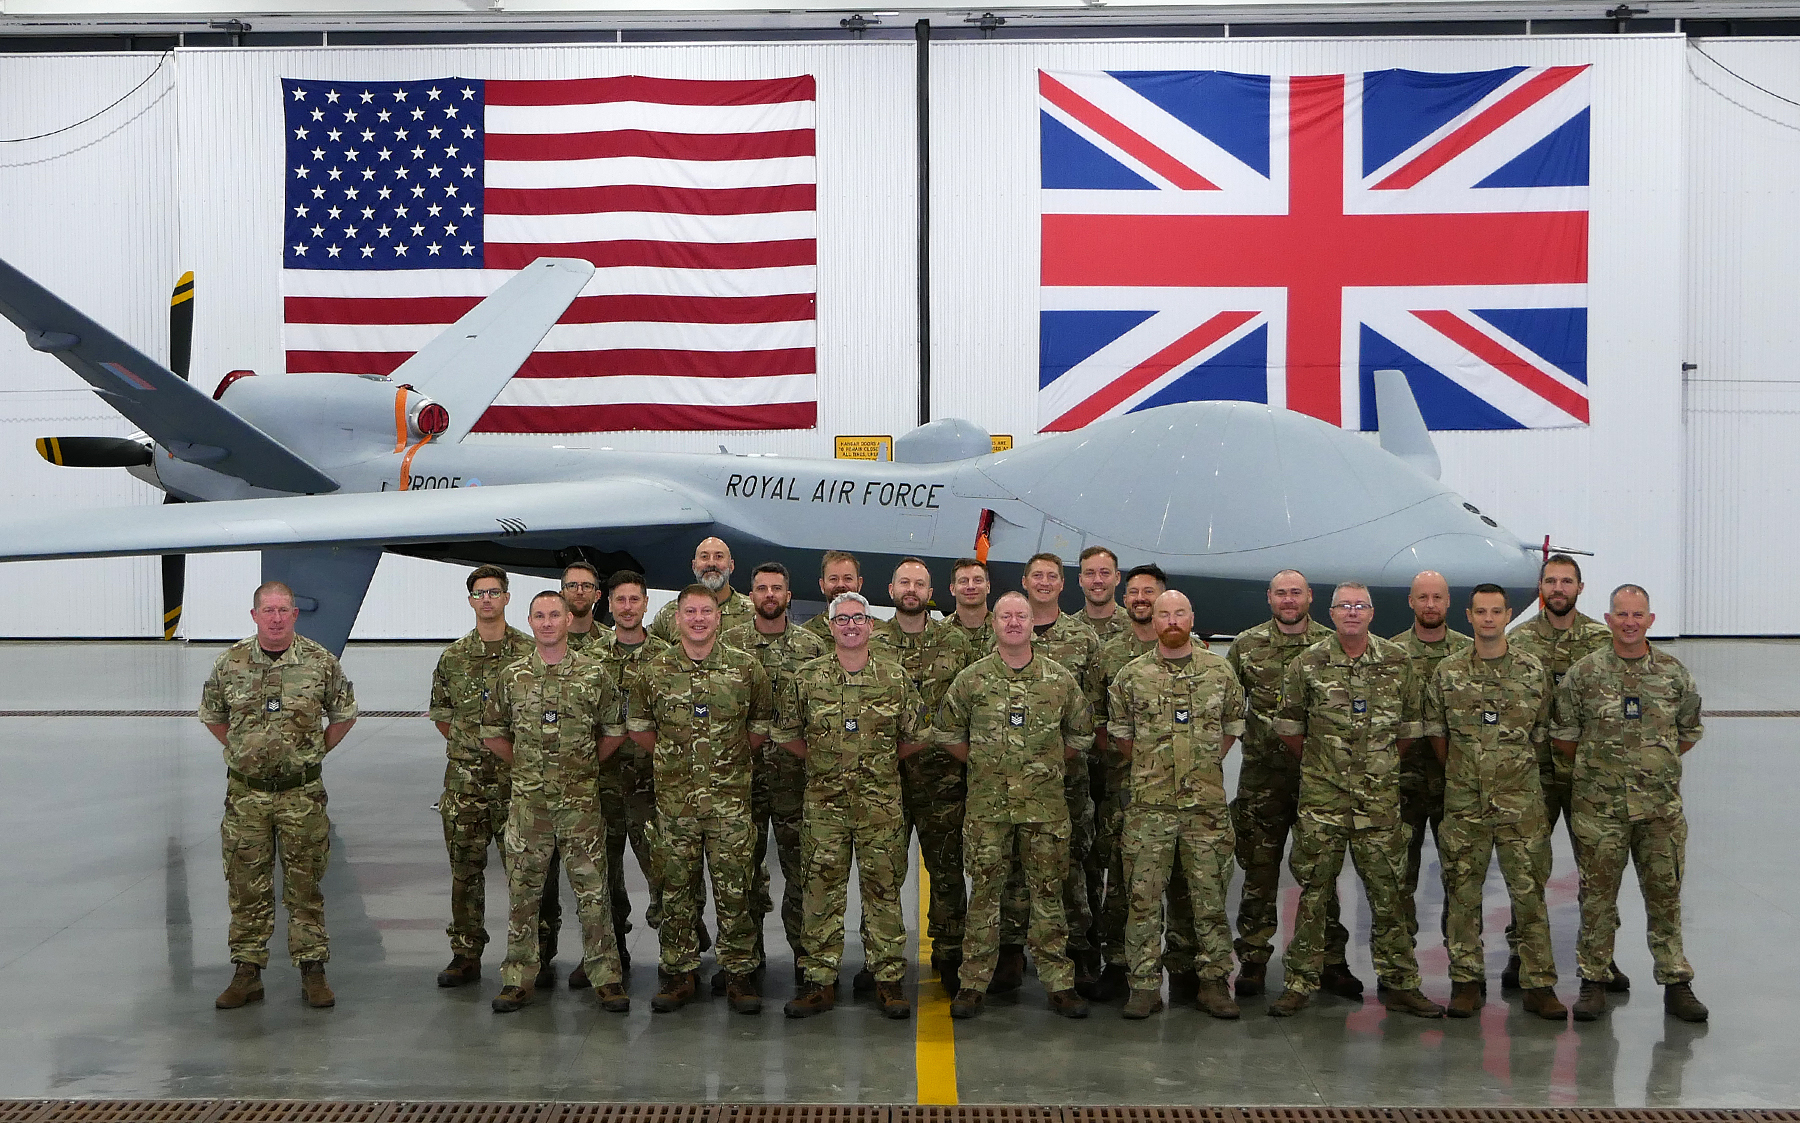 Image shows RAF squadron photo with the Protector aircraft and flags of the UK and USA.